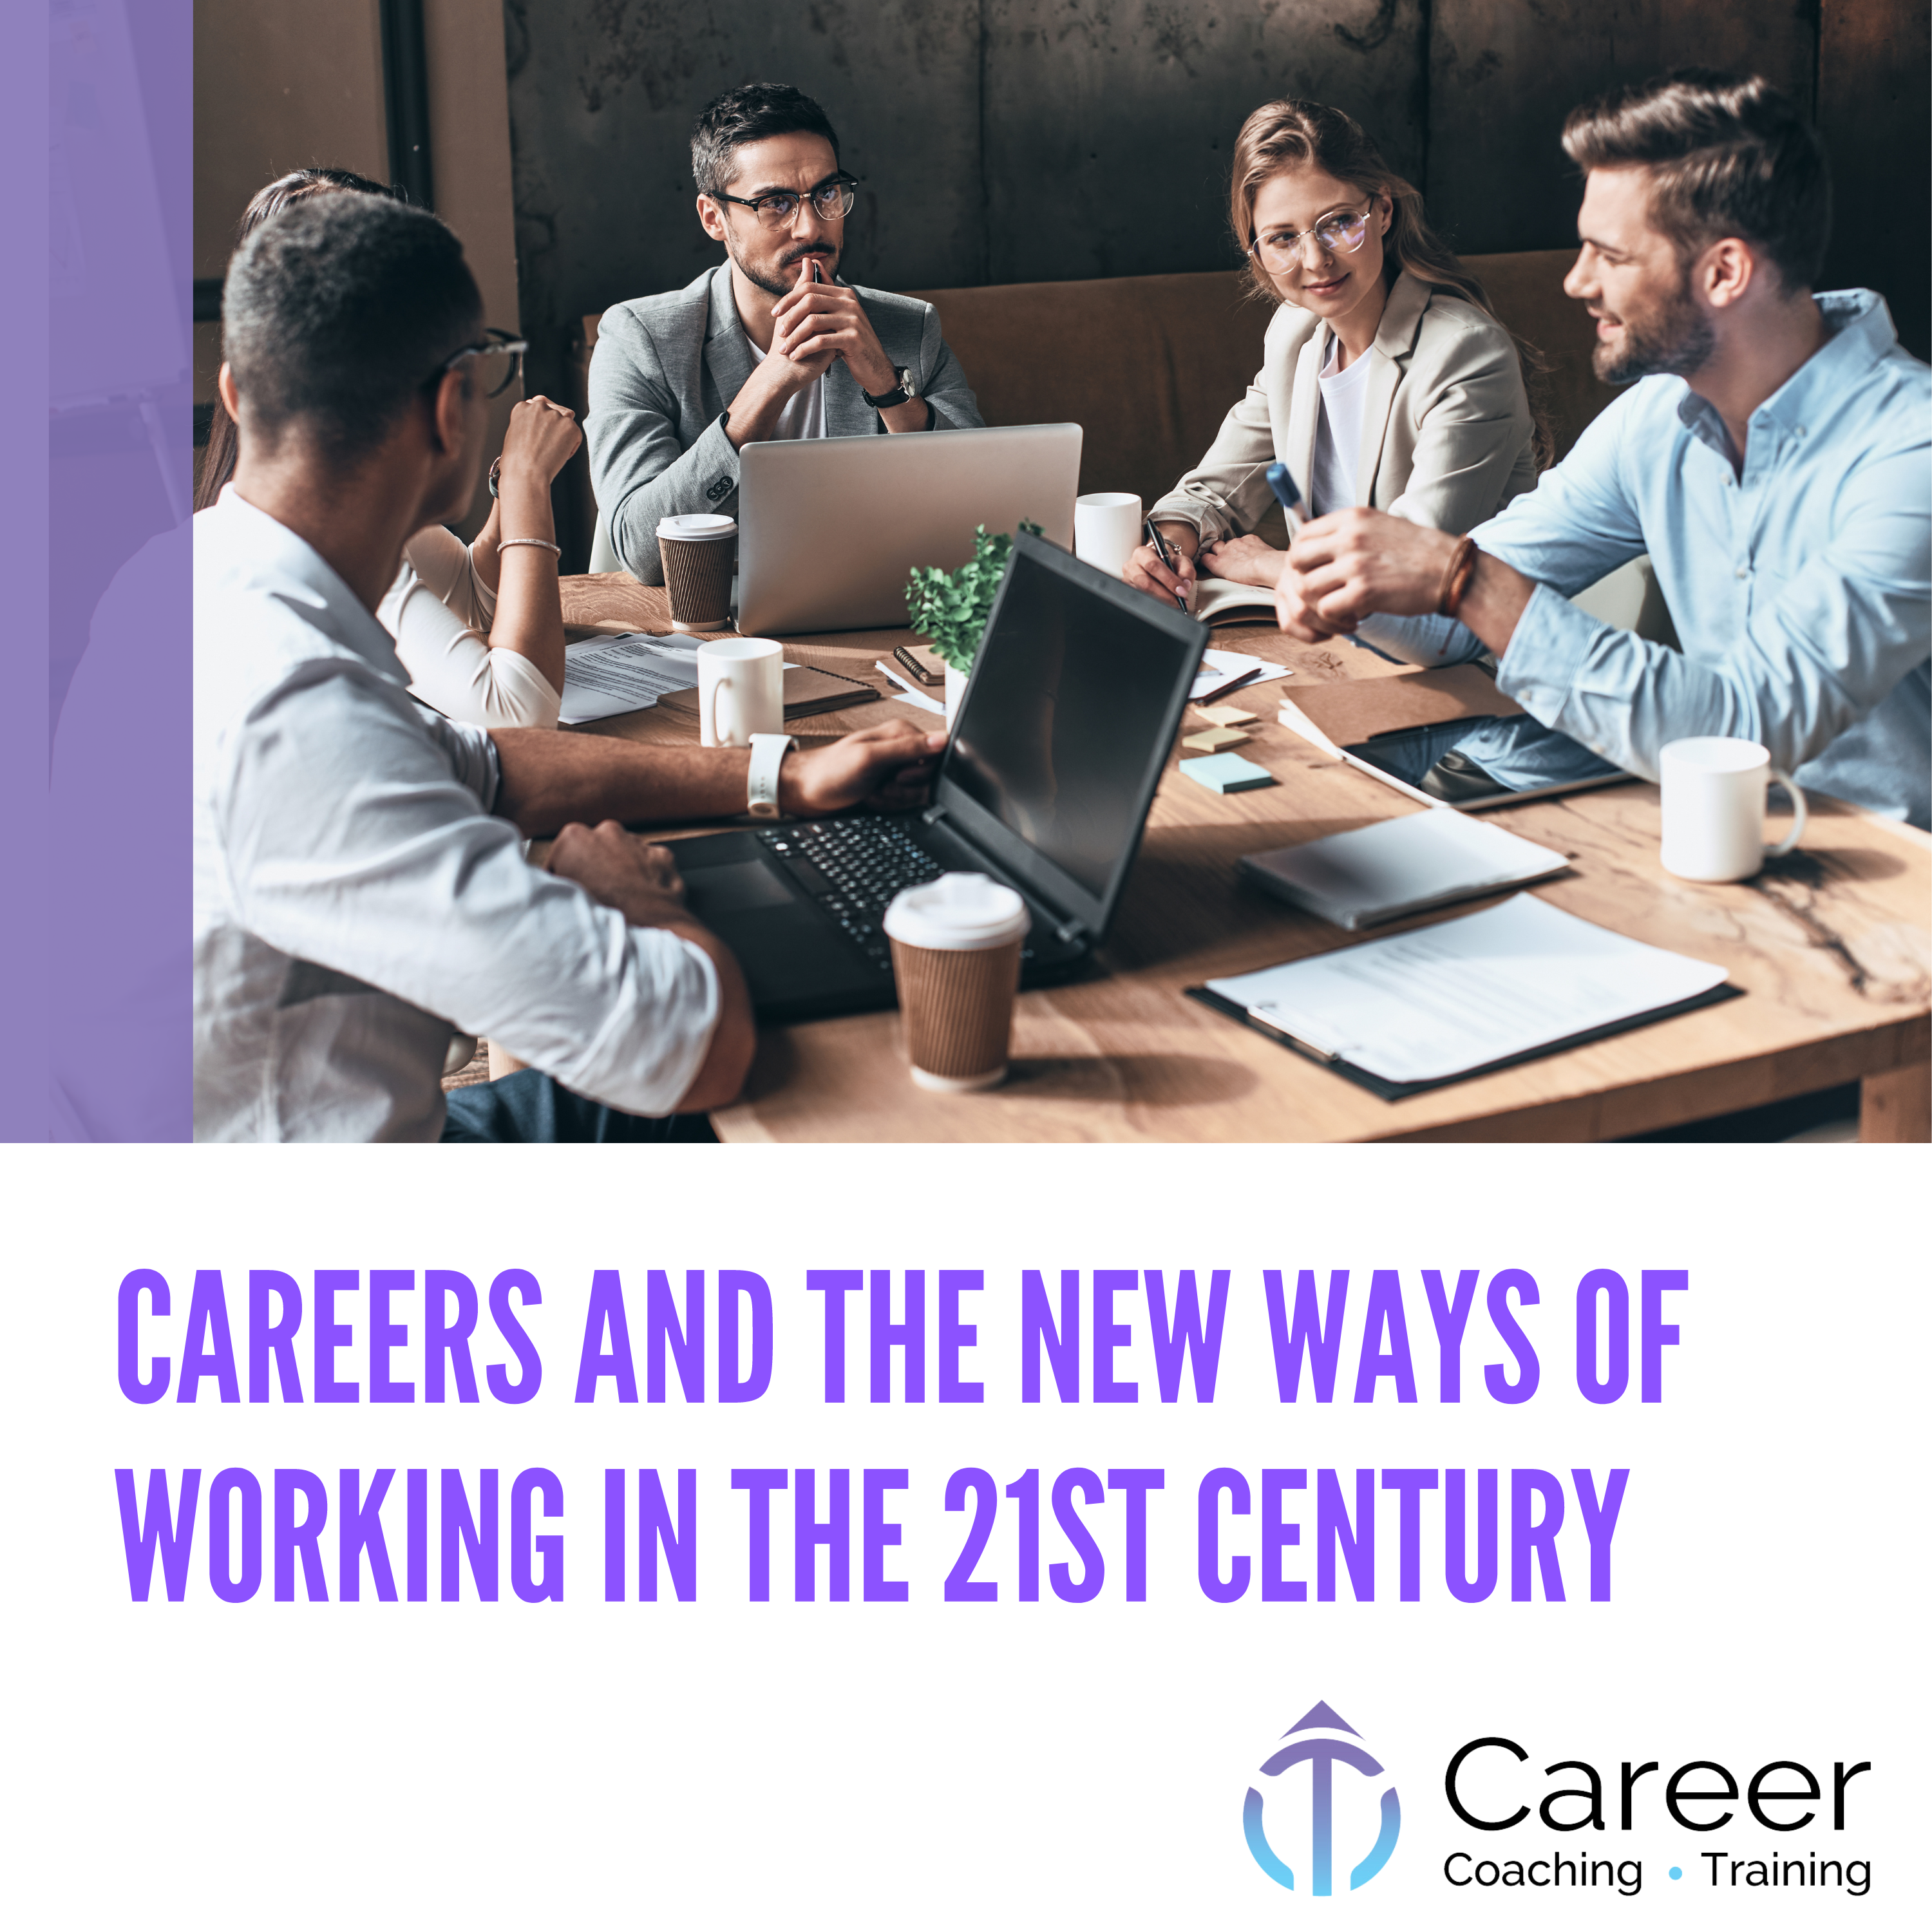 Careers and the New Ways of Working in the 21st Century